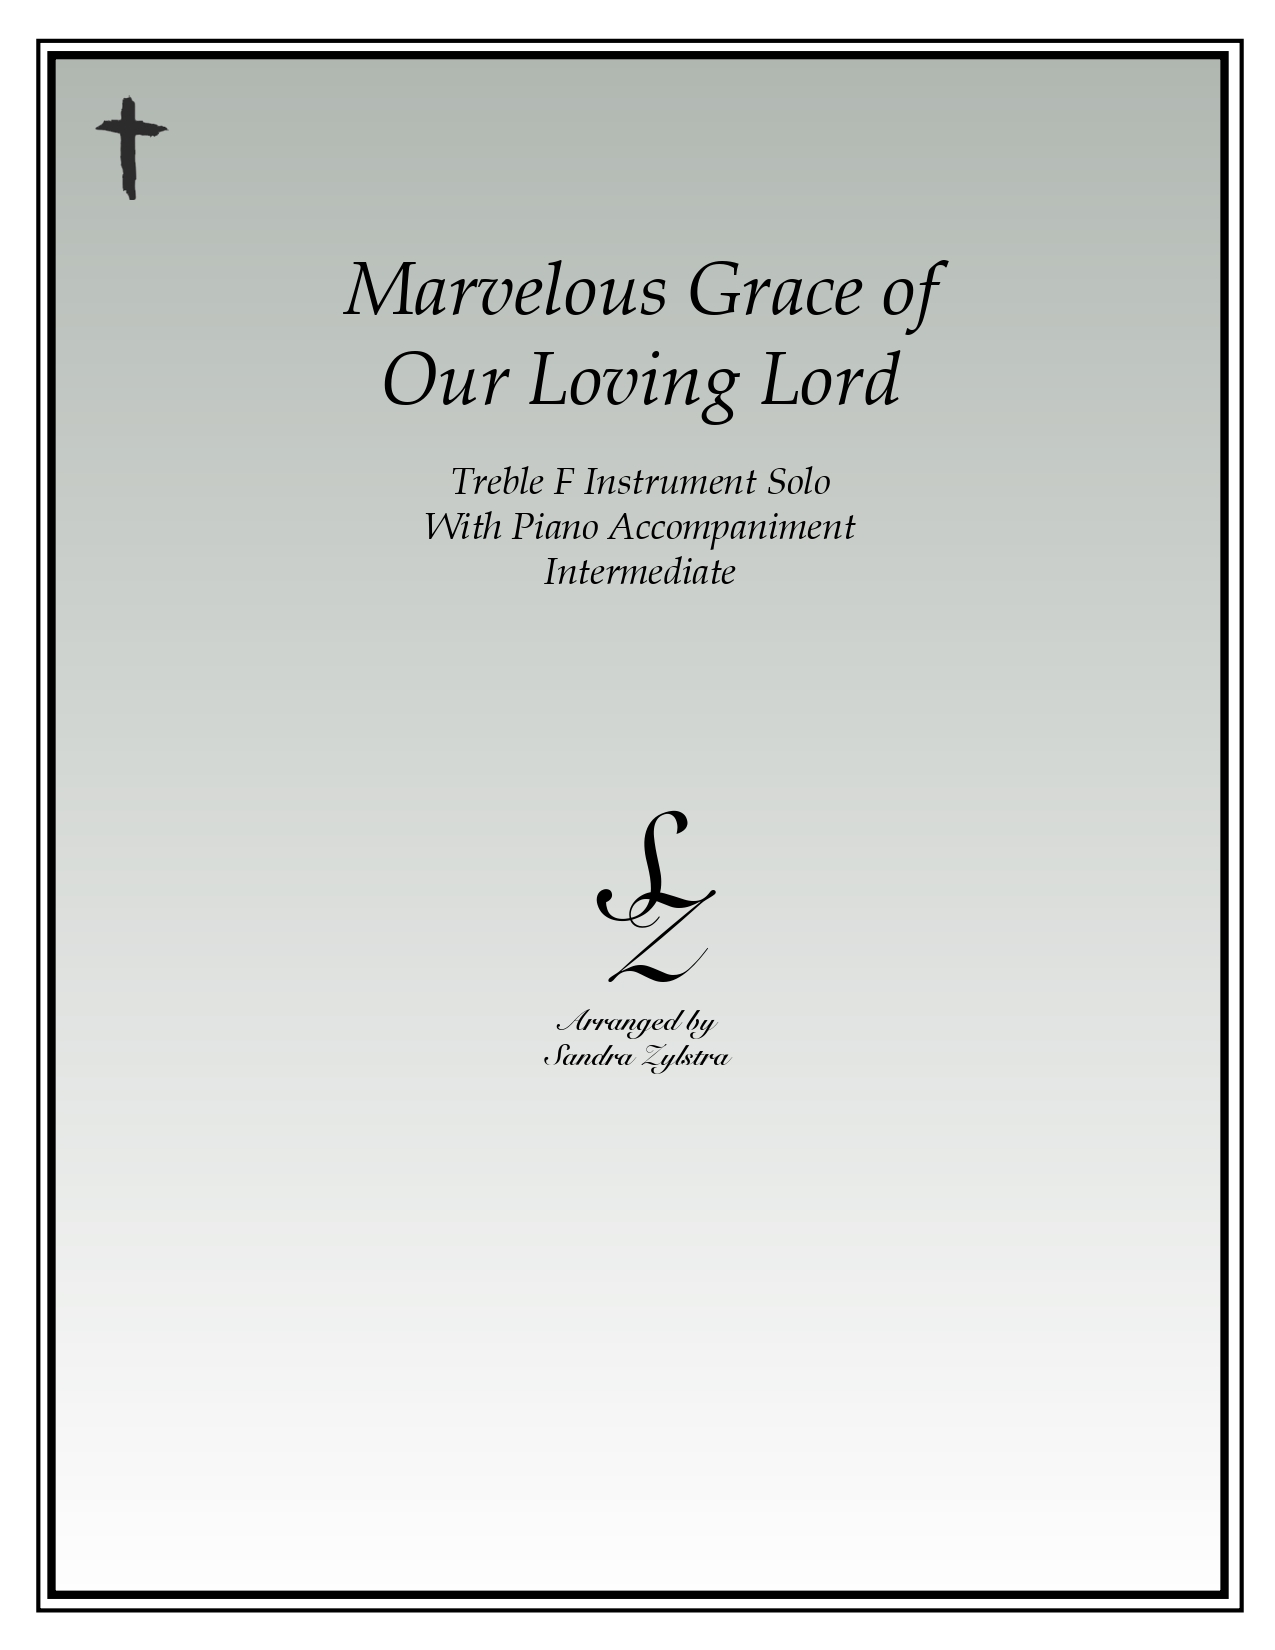 Marvelous Grace Of Our Loving Lord F instrument solo part cover page 00011